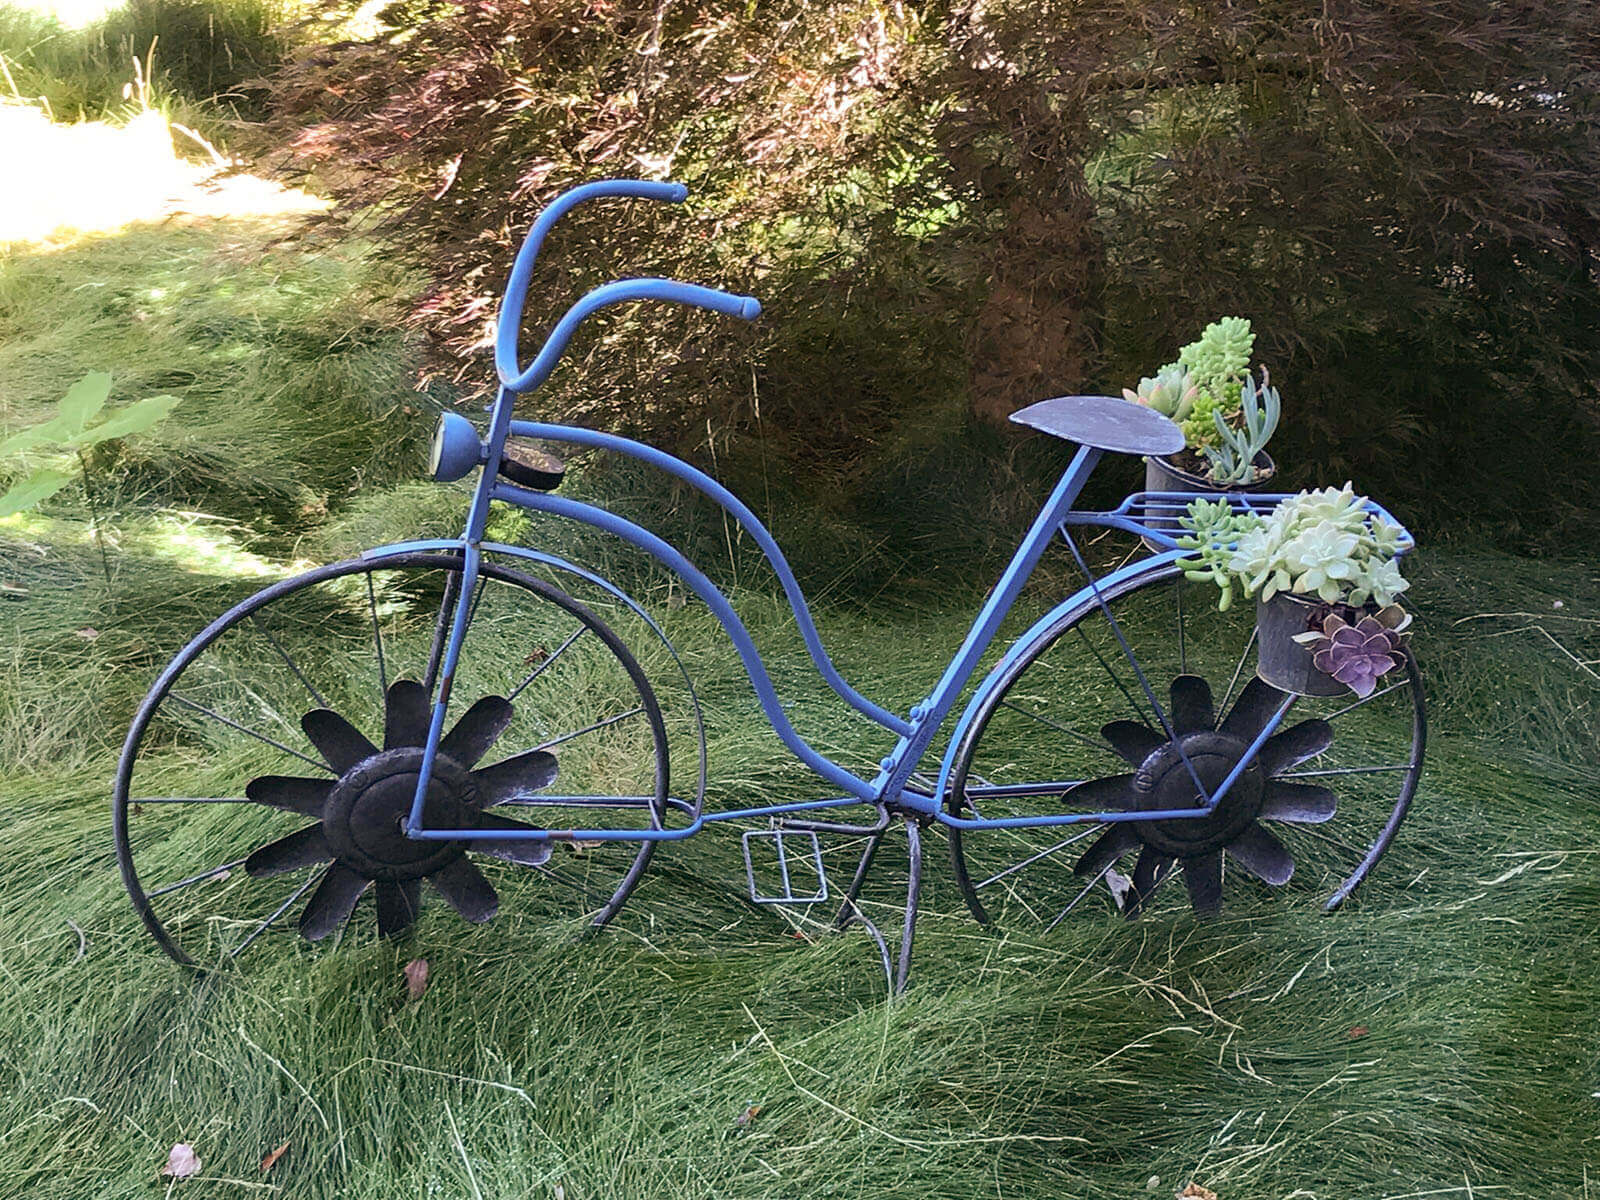 Blue painted bike decoration with succulents growing out of pots on the side, with long sweeping grass below